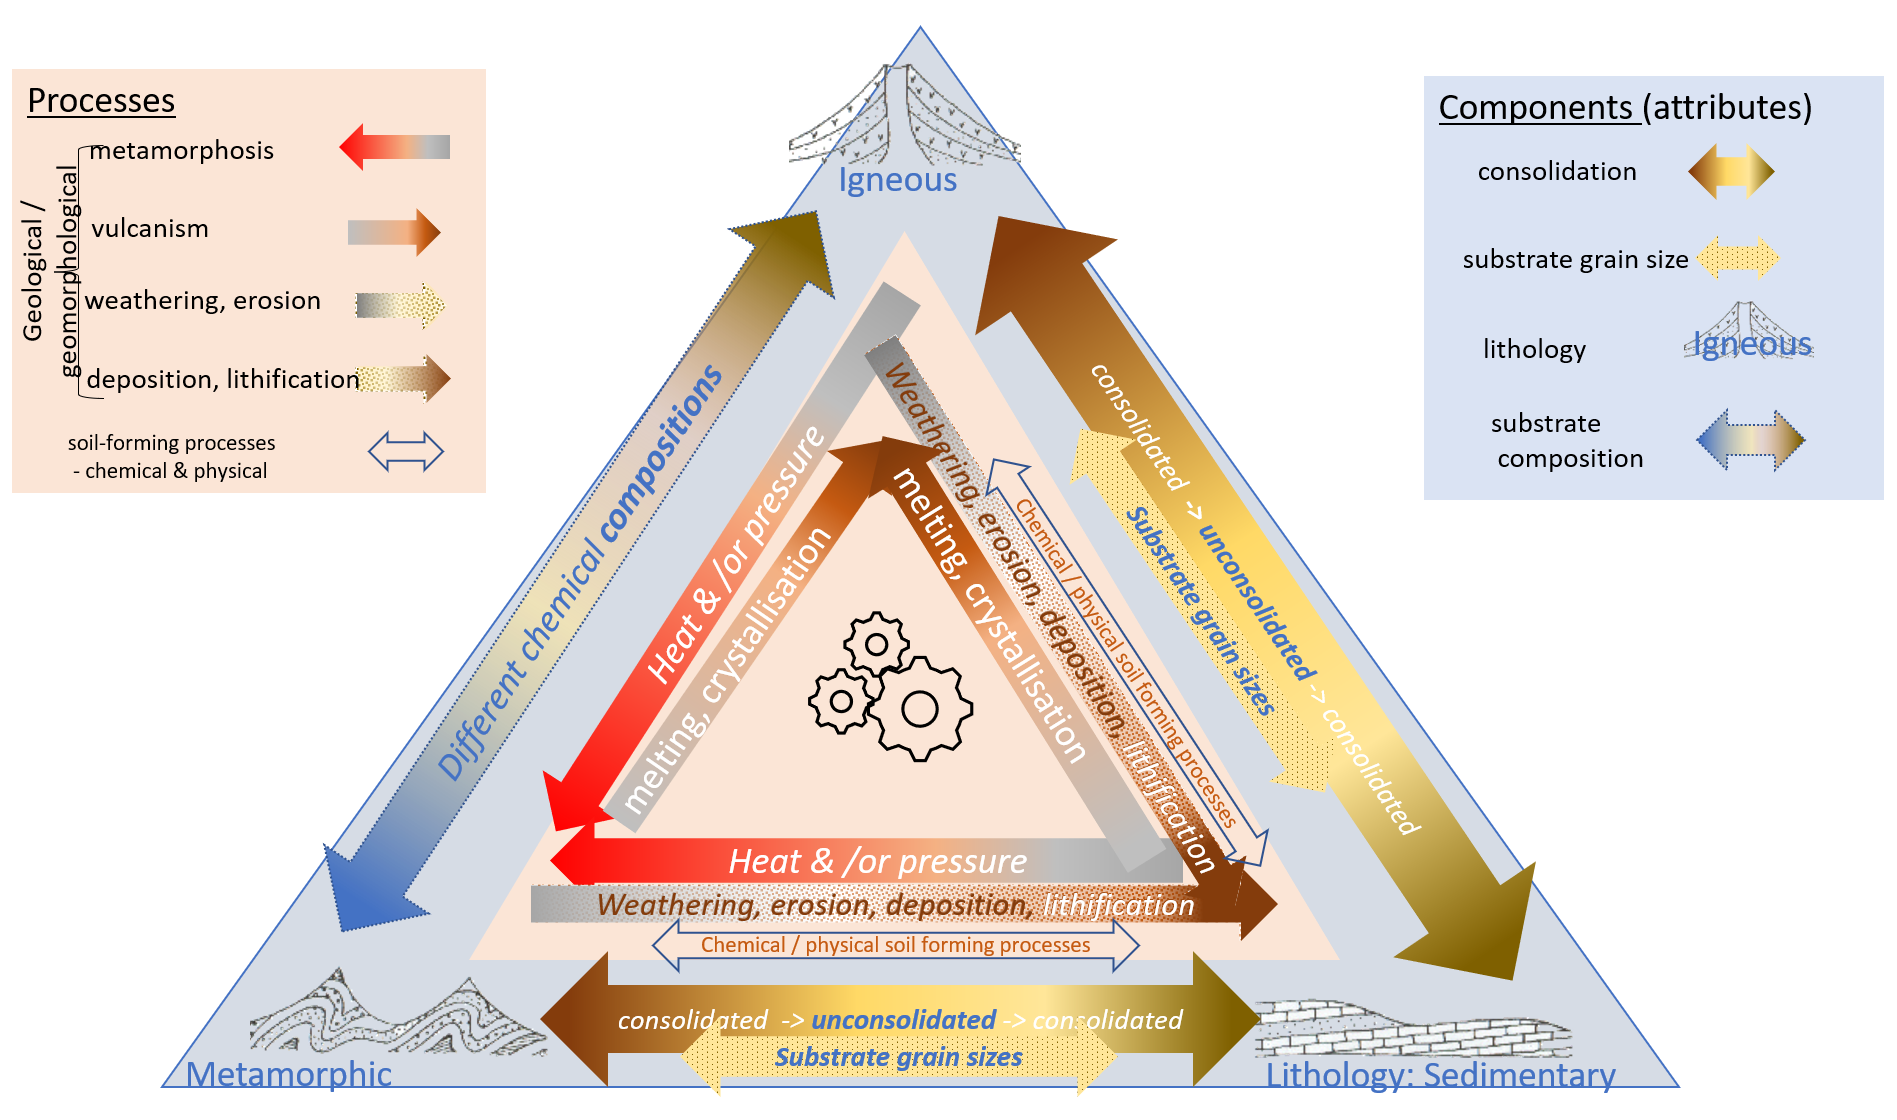 Rock Cycle processes that give rise to attributes (components)– modified after Geoscience Australia 2012